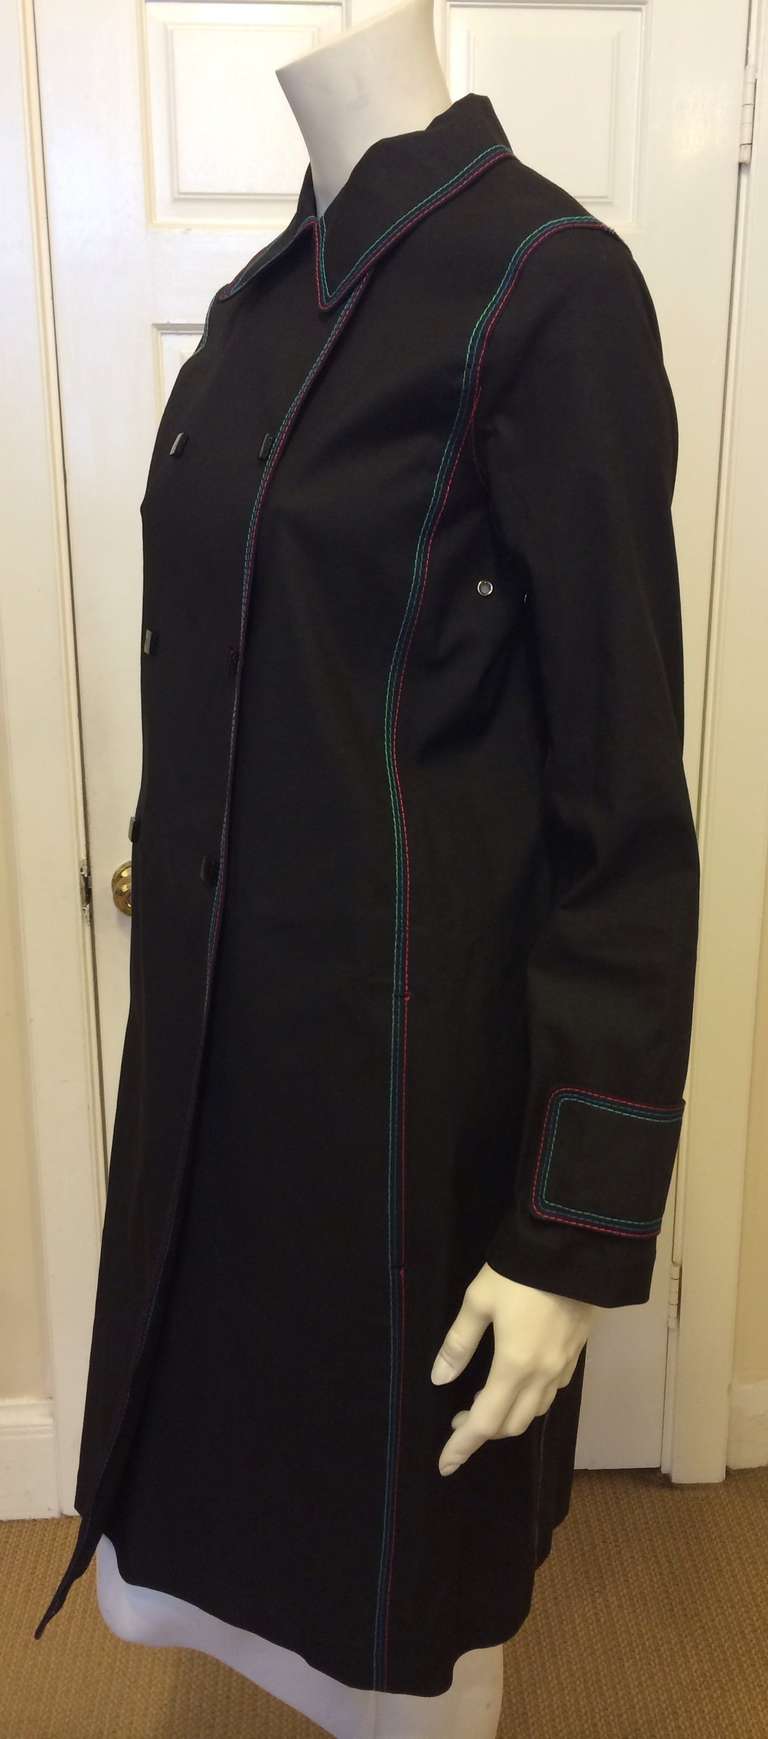 Louis Vuitton Black Trench Coat at 1stdibs